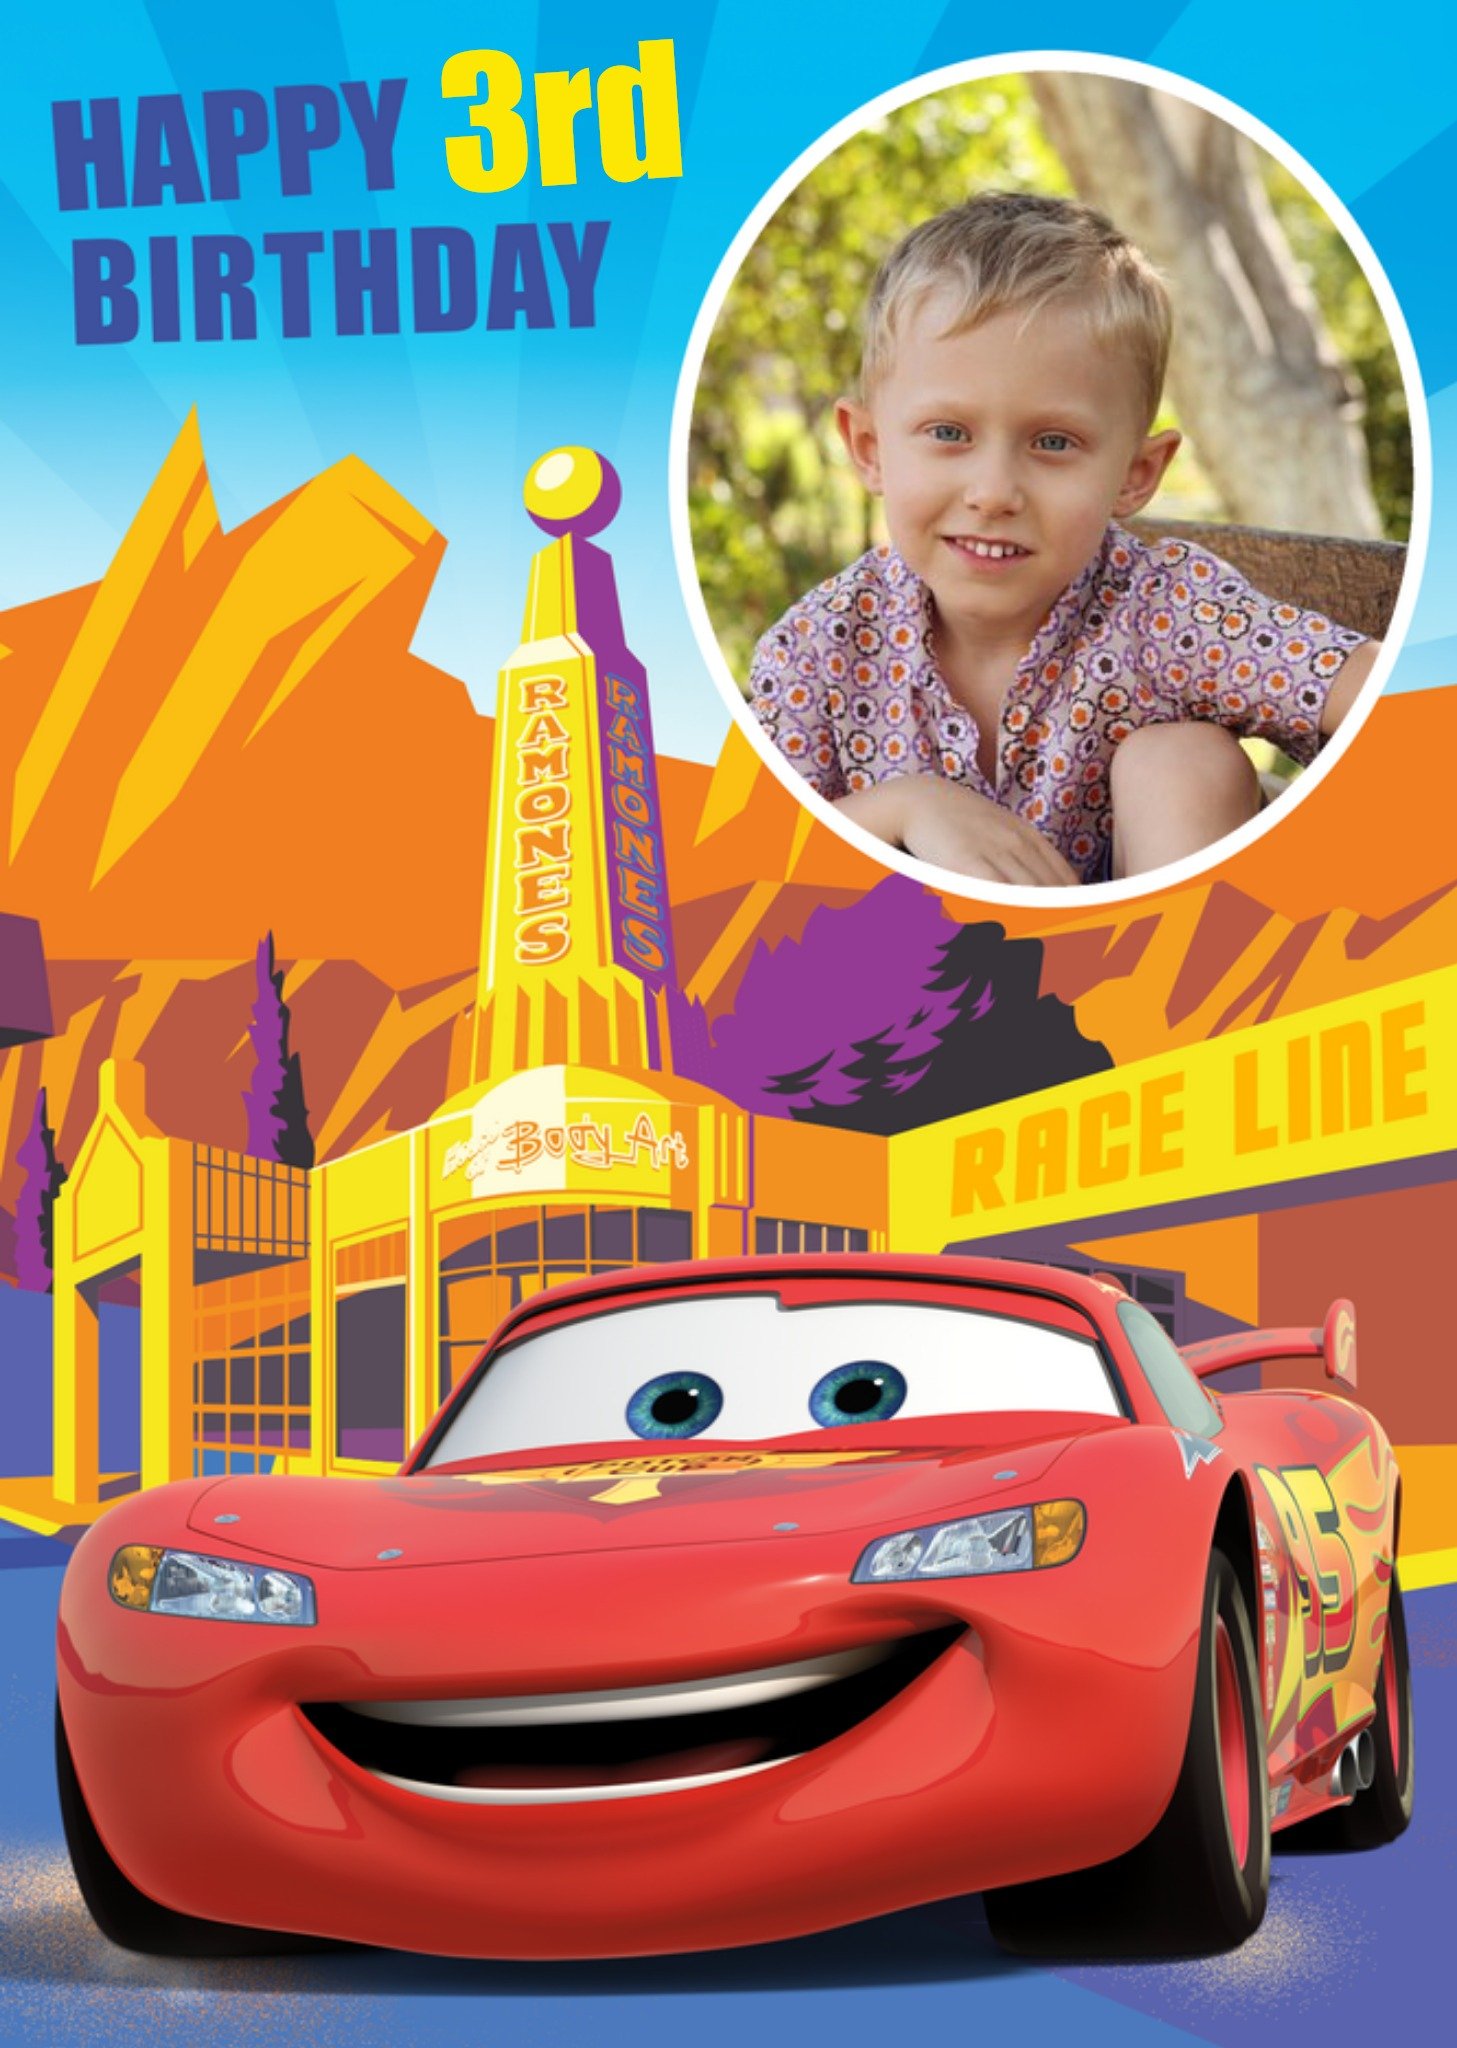 Disney Cars Get To The Race Line Happy Birthday Photo Card, Large